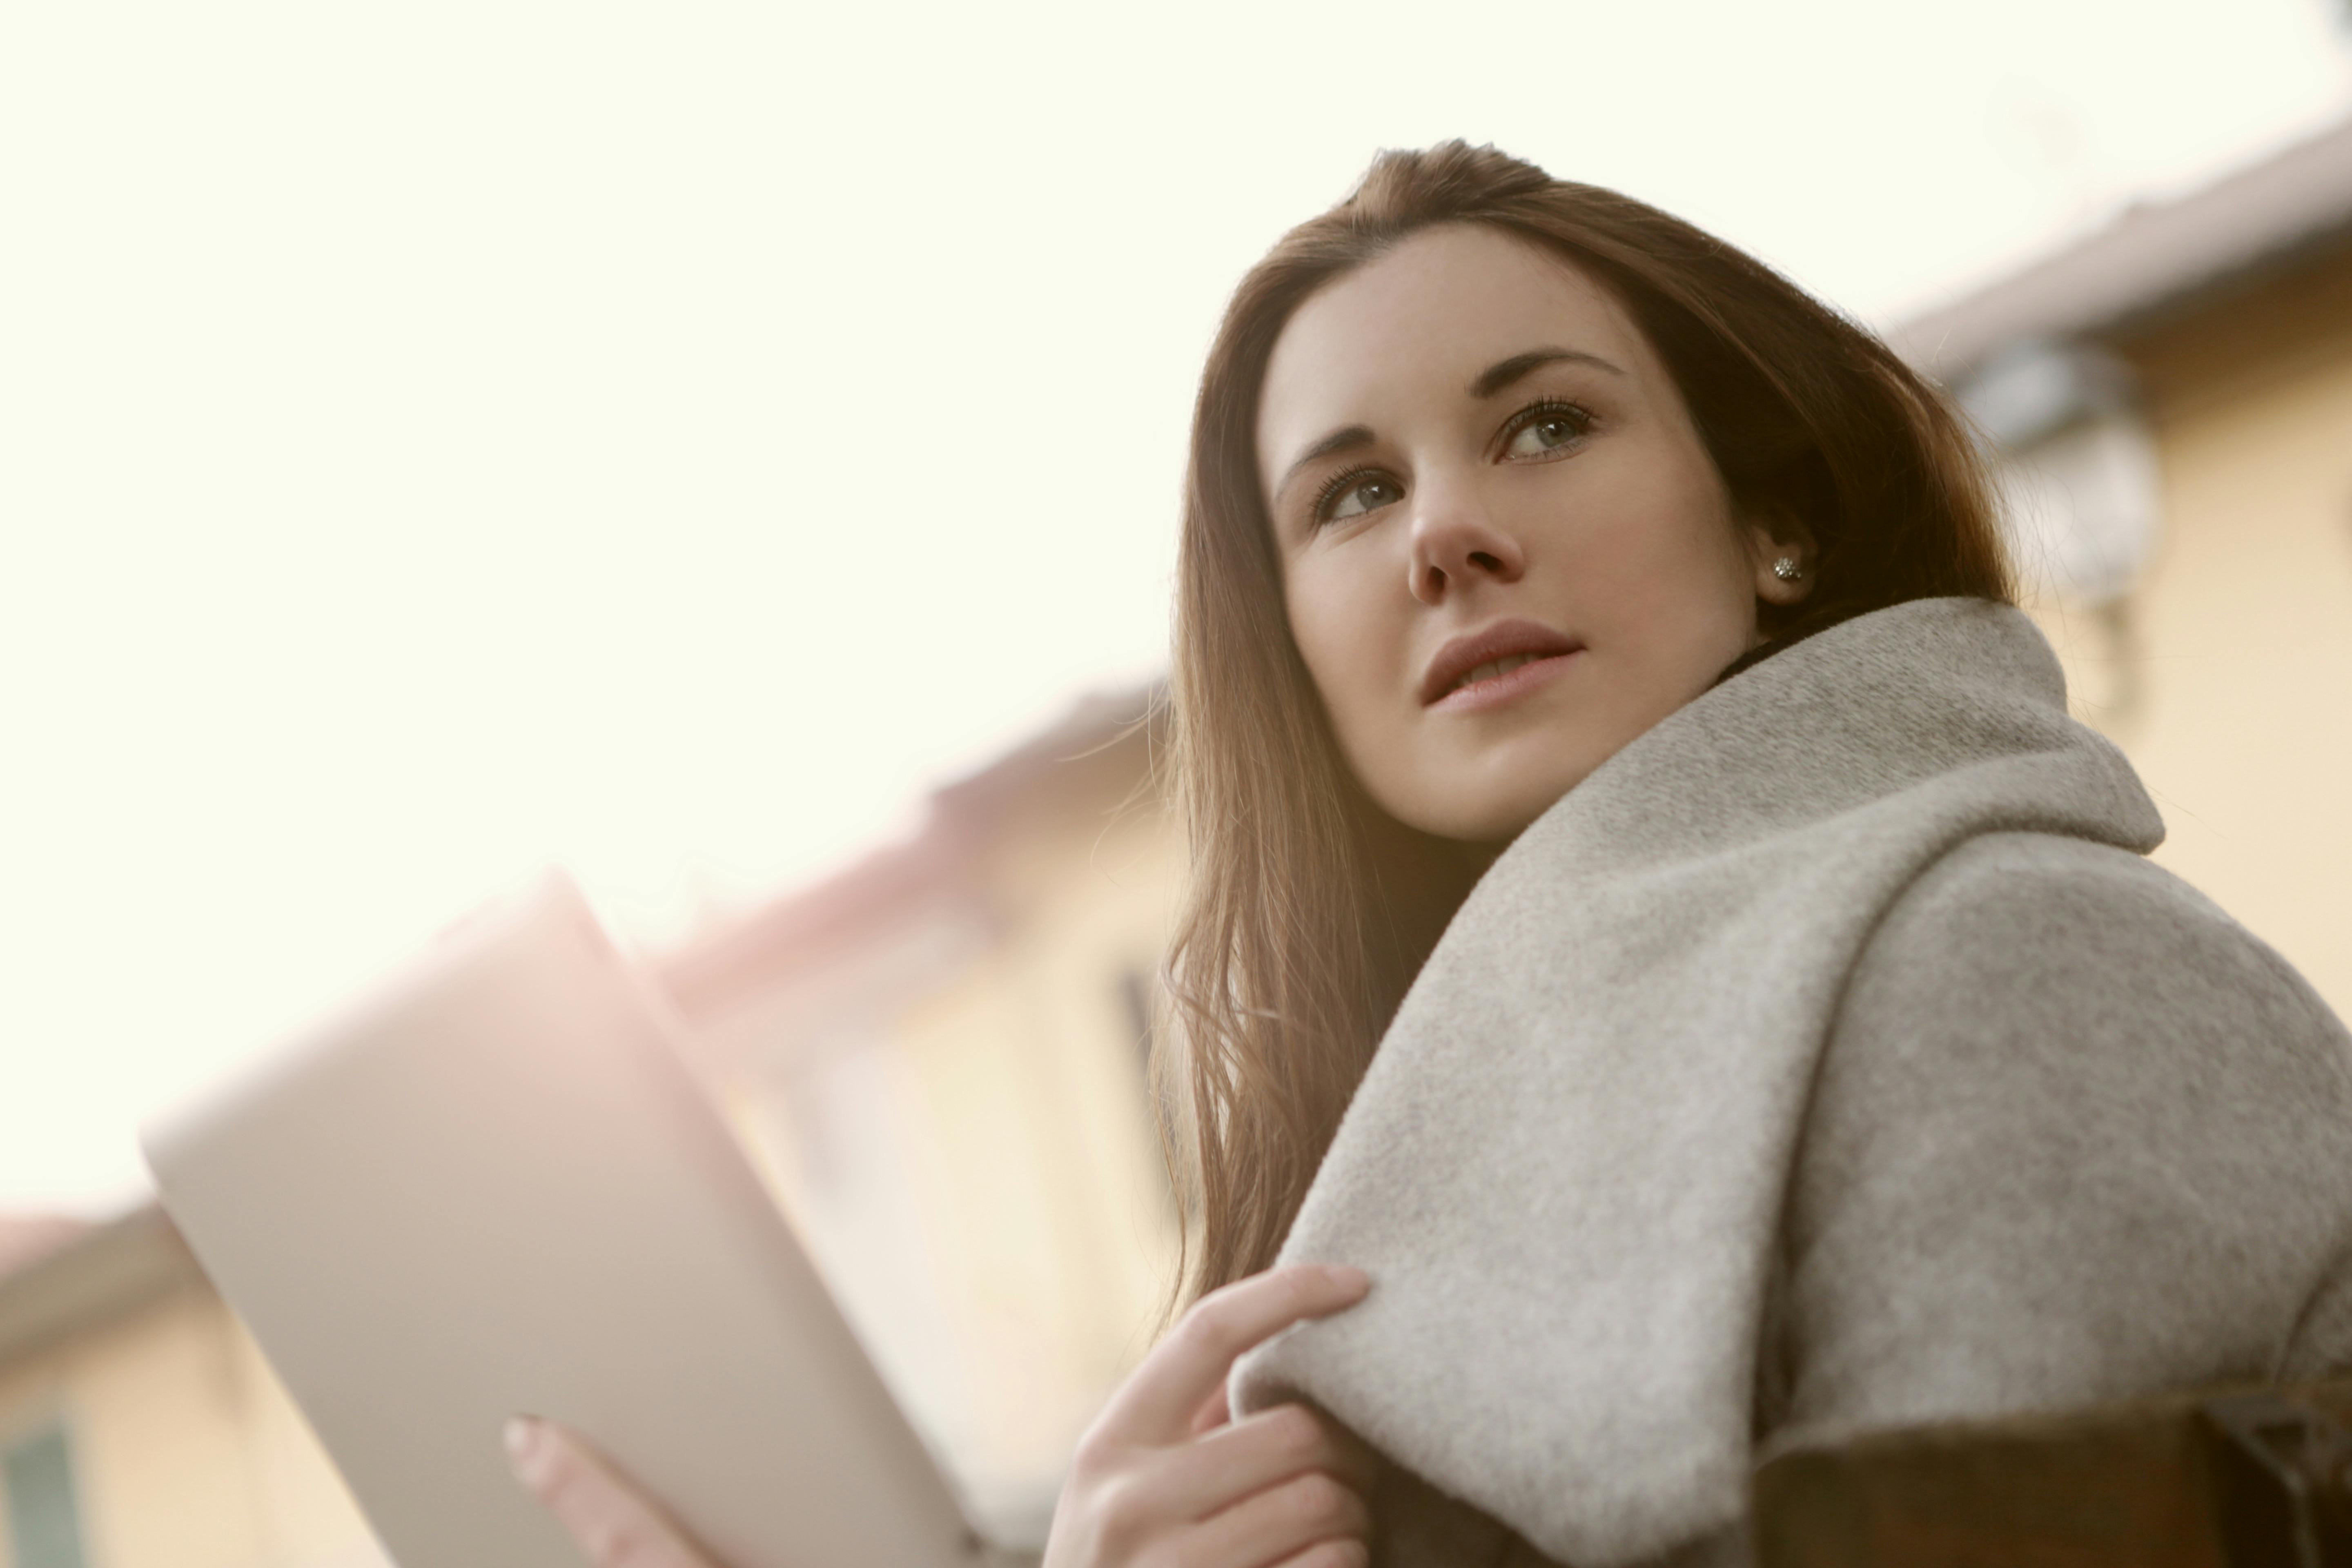 woman in gray hoodie sweater holding a silver tablet